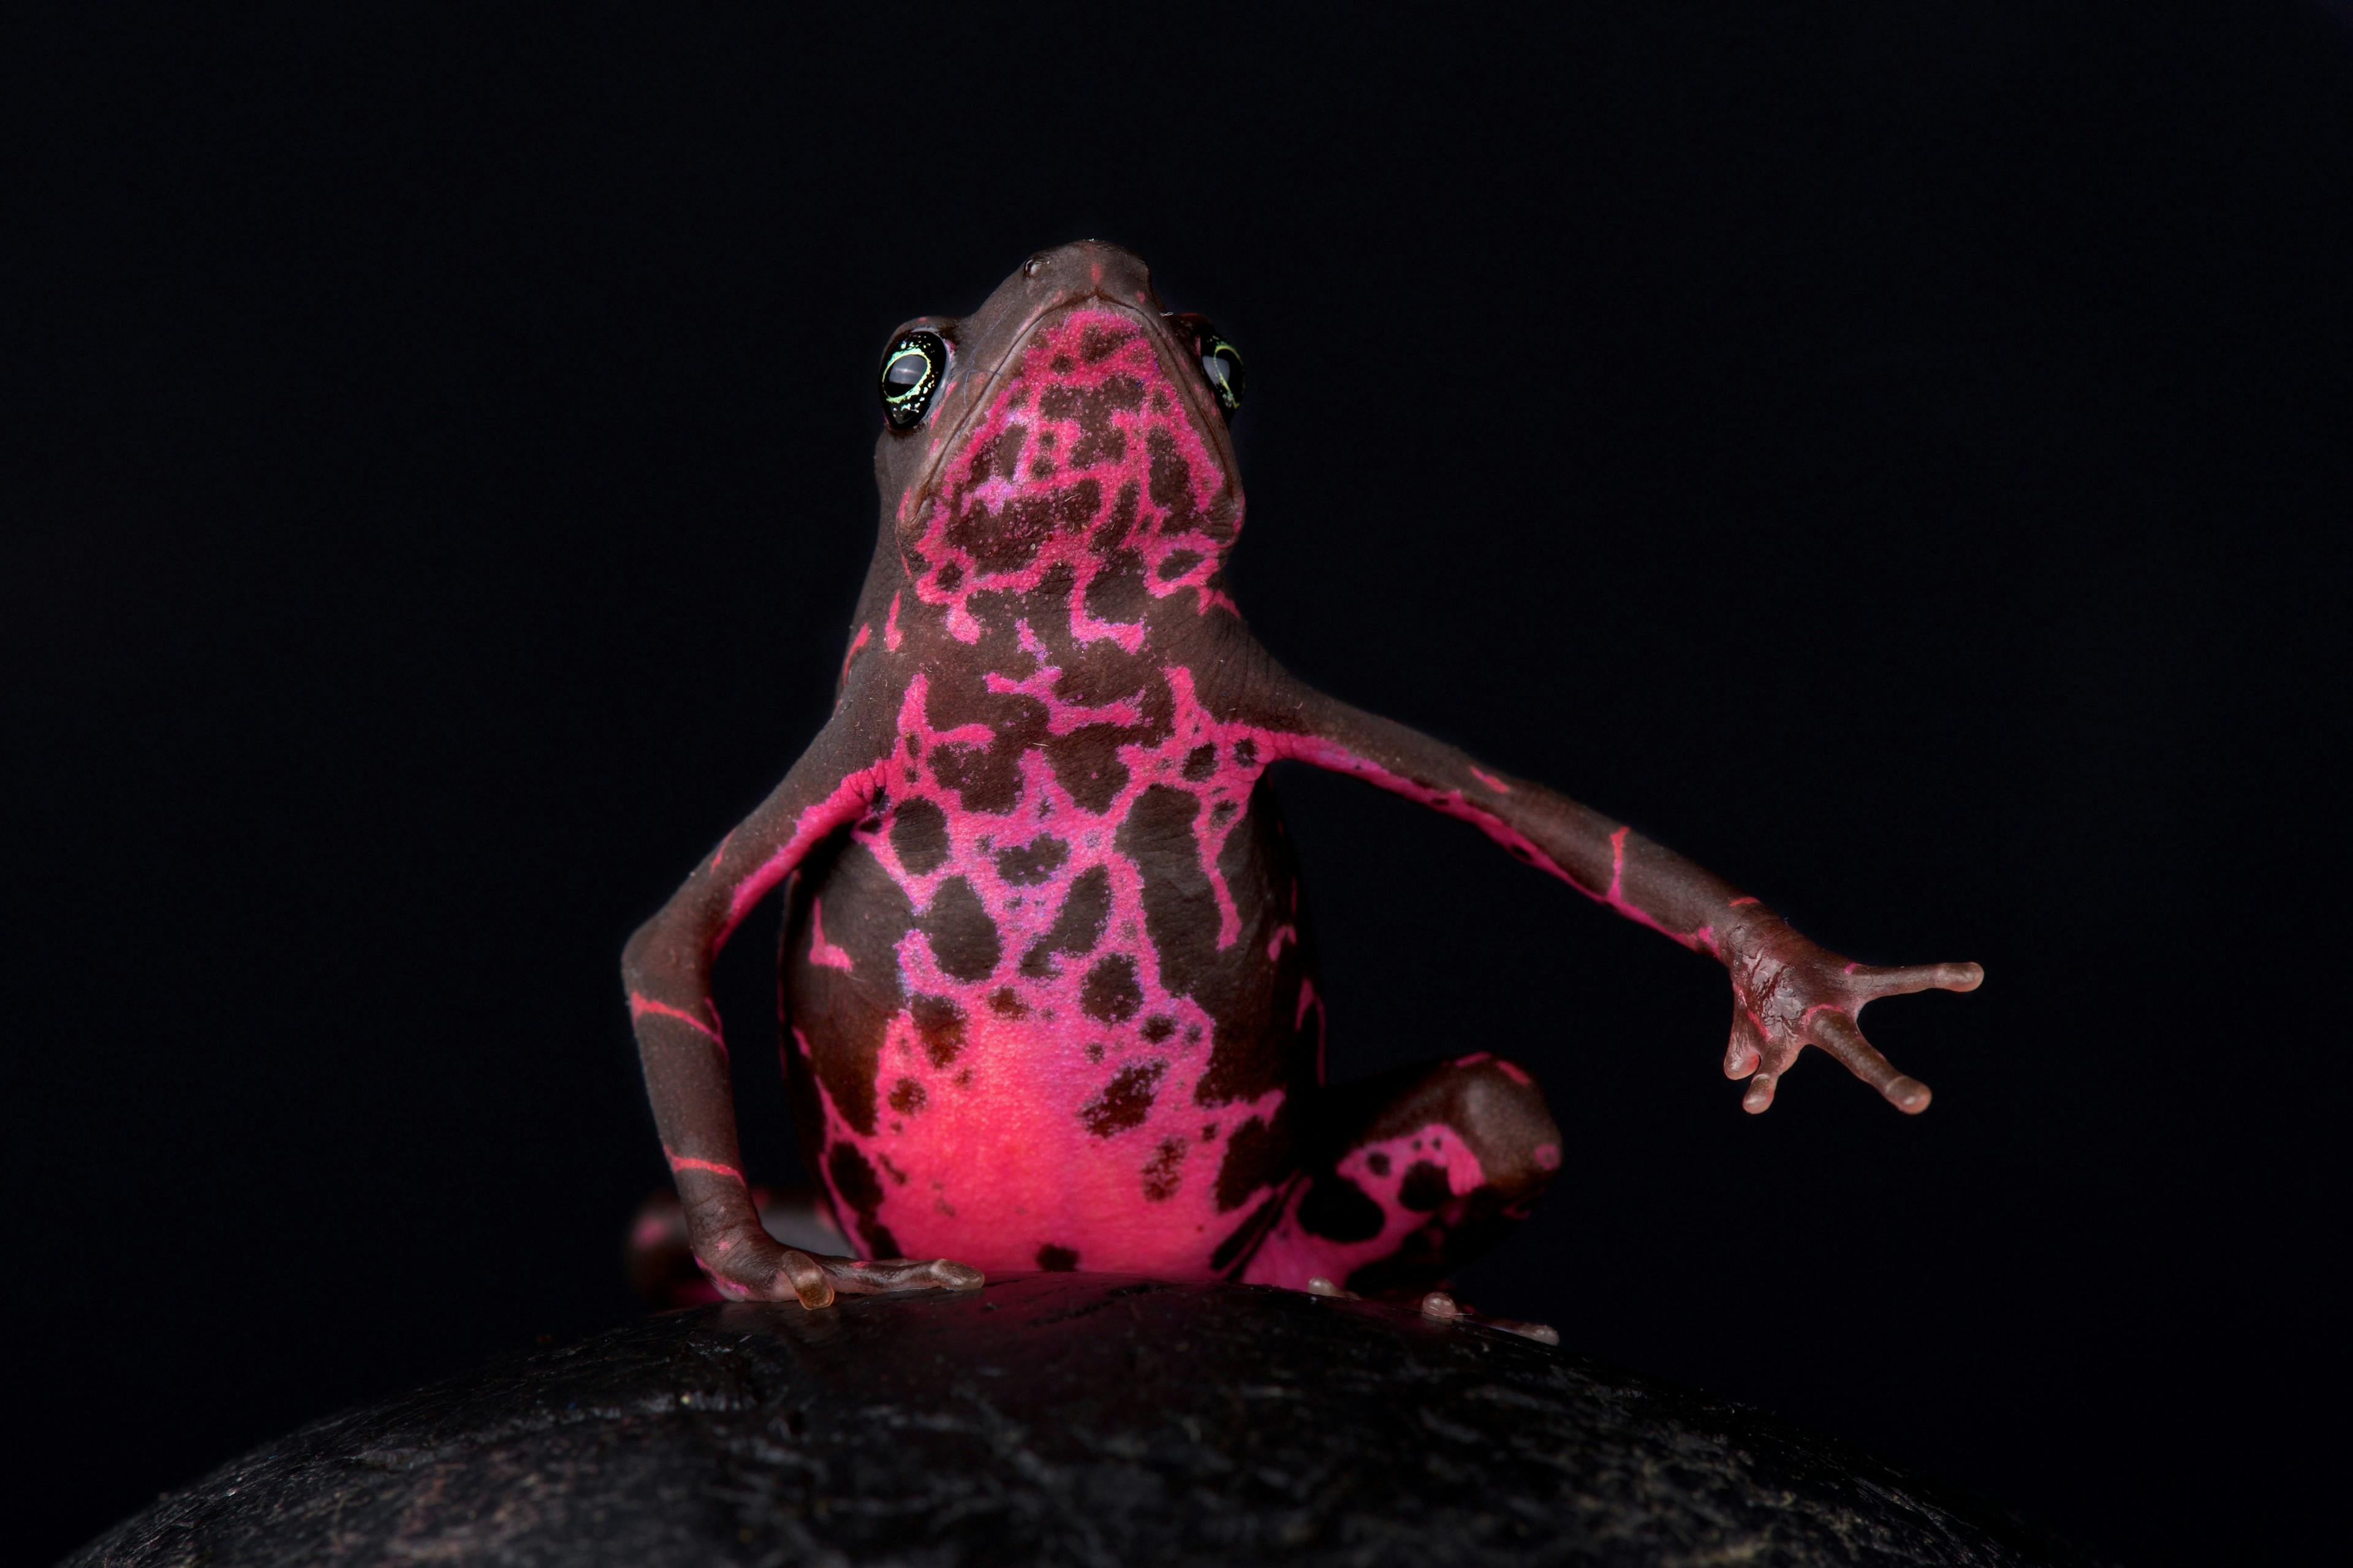 The Purple harlequin Toad